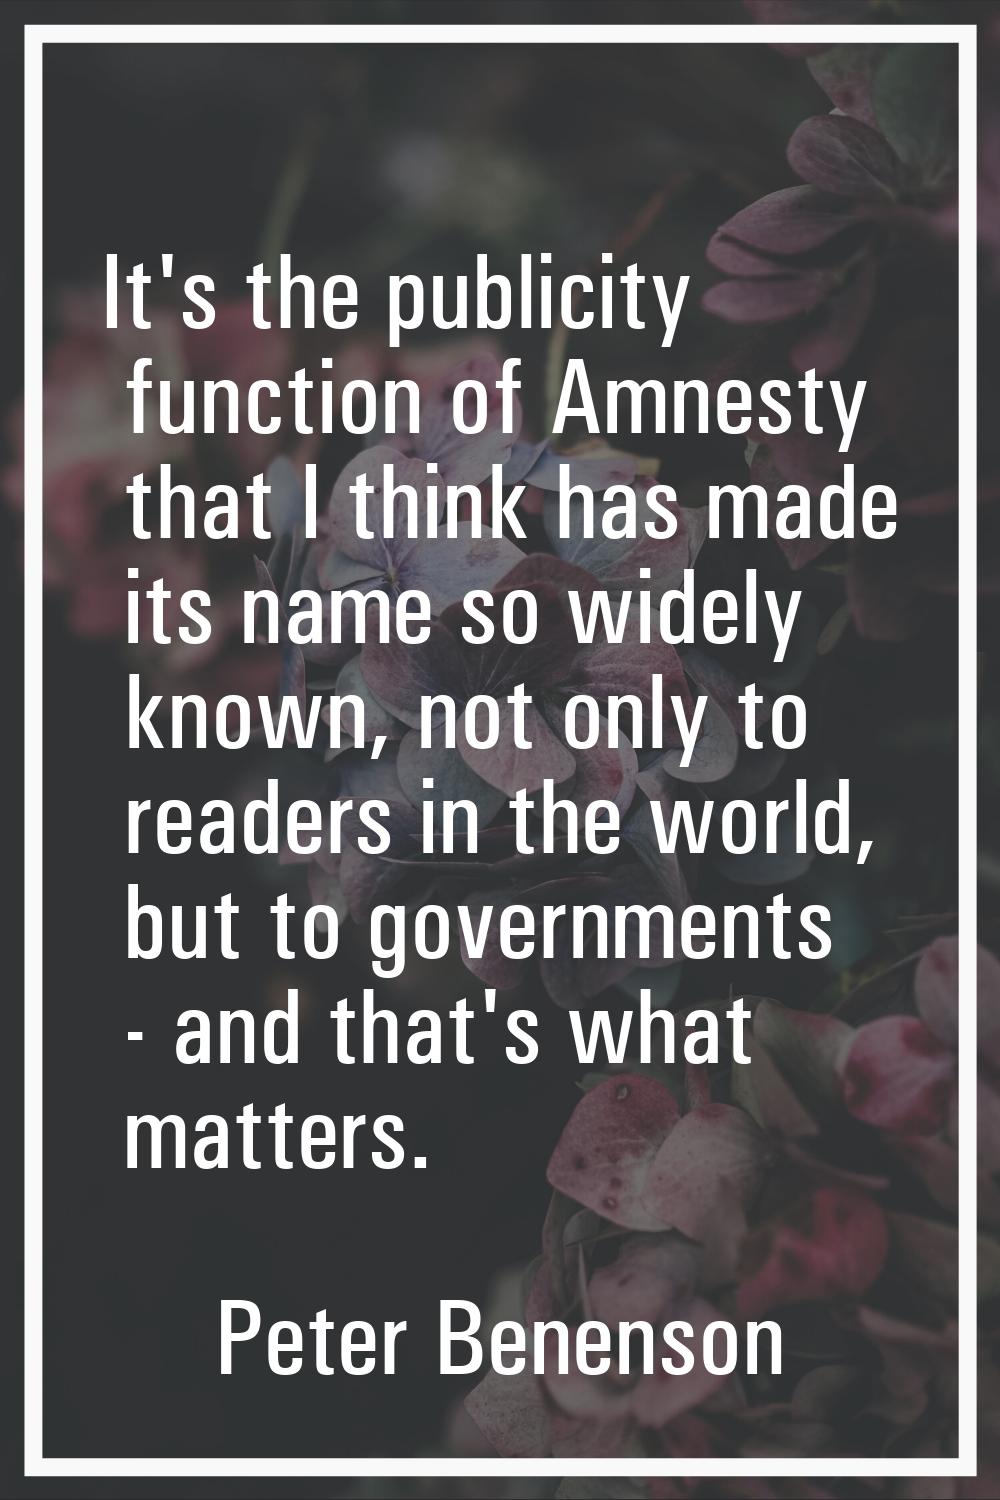 It's the publicity function of Amnesty that I think has made its name so widely known, not only to 